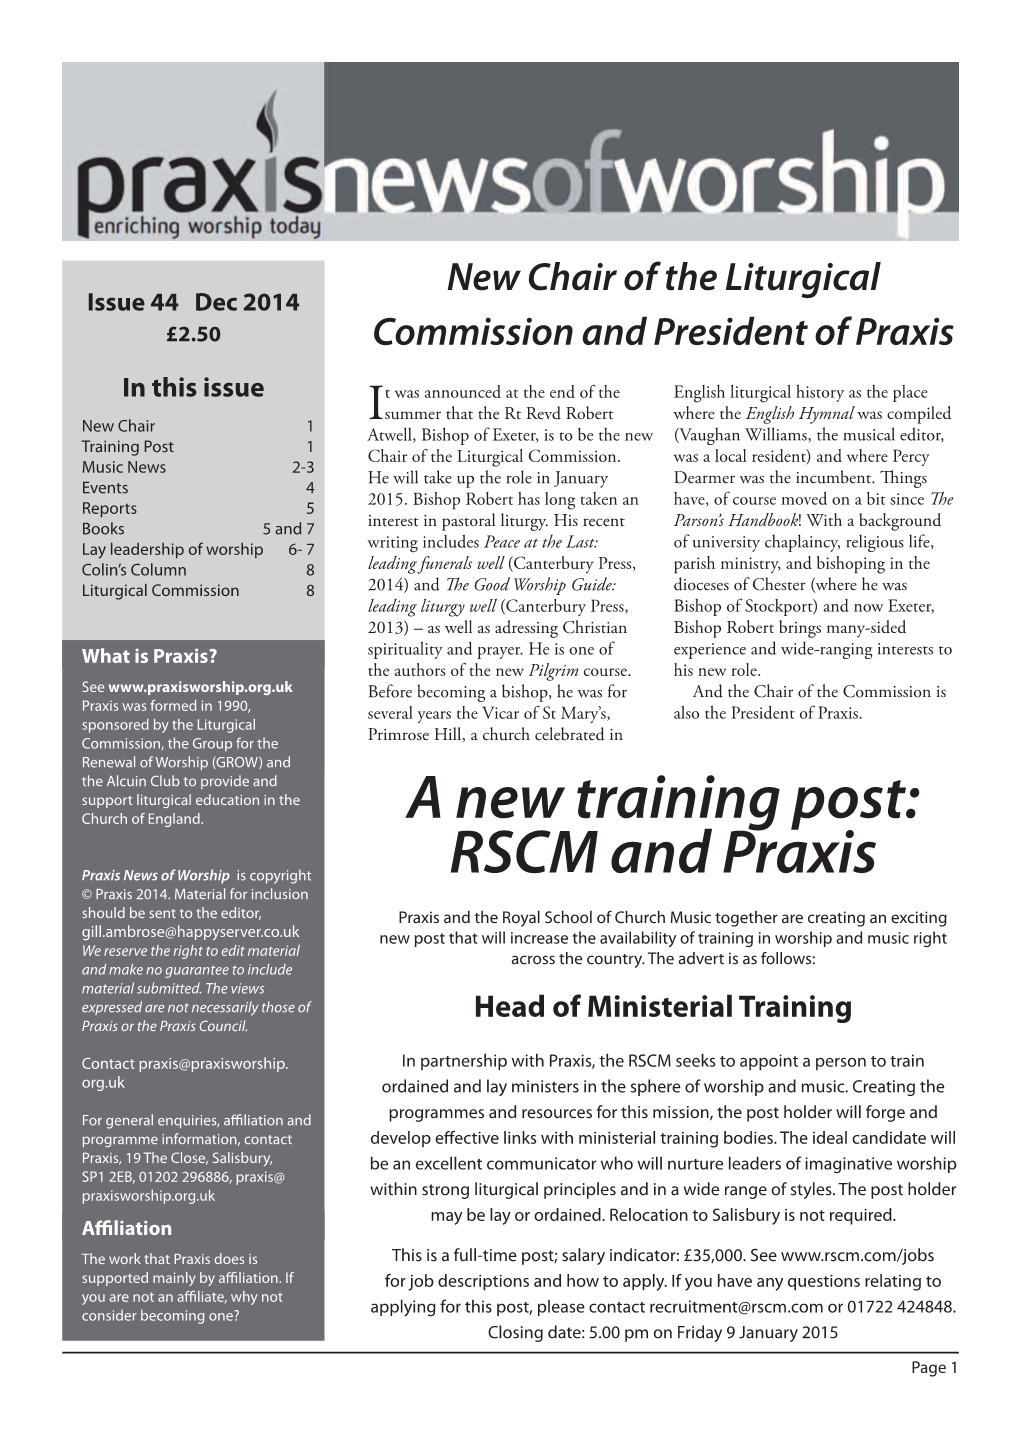 A New Training Post: RSCM and Praxis